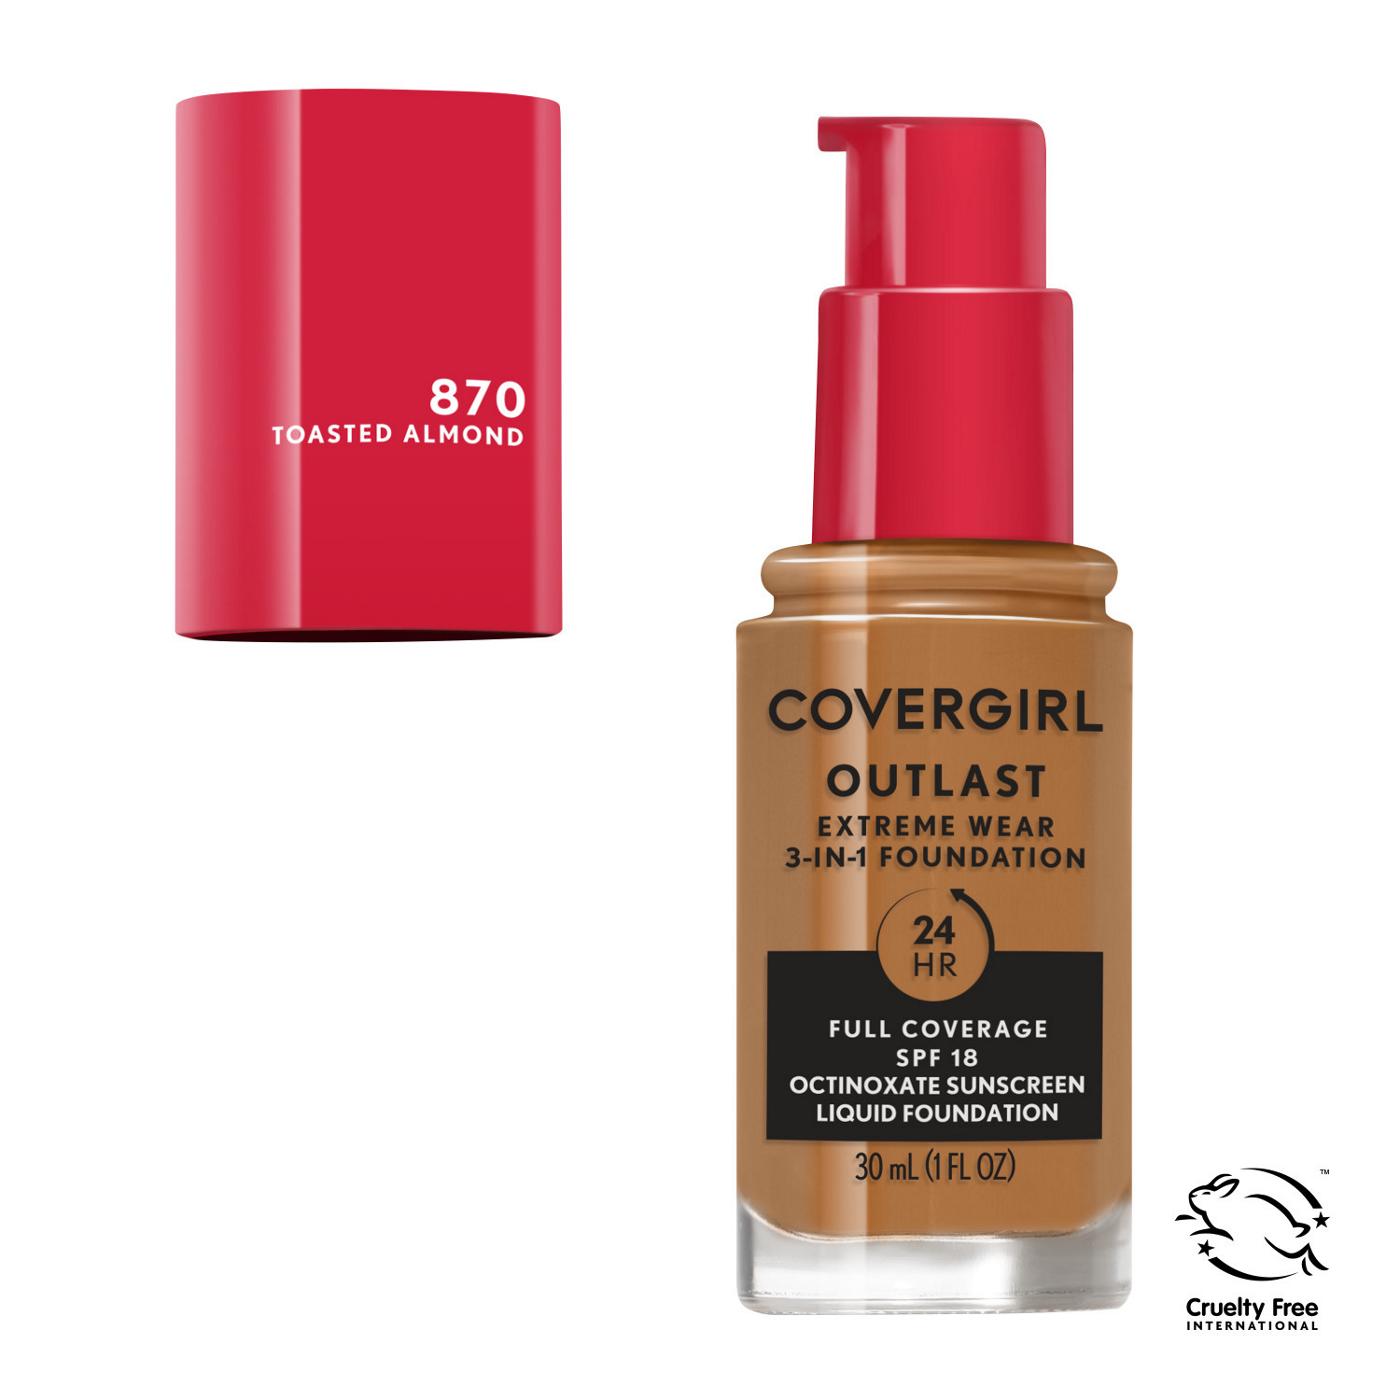 Covergirl Outlast Extreme Wear Liquid Foundation 870 Toasted Almond; image 5 of 11